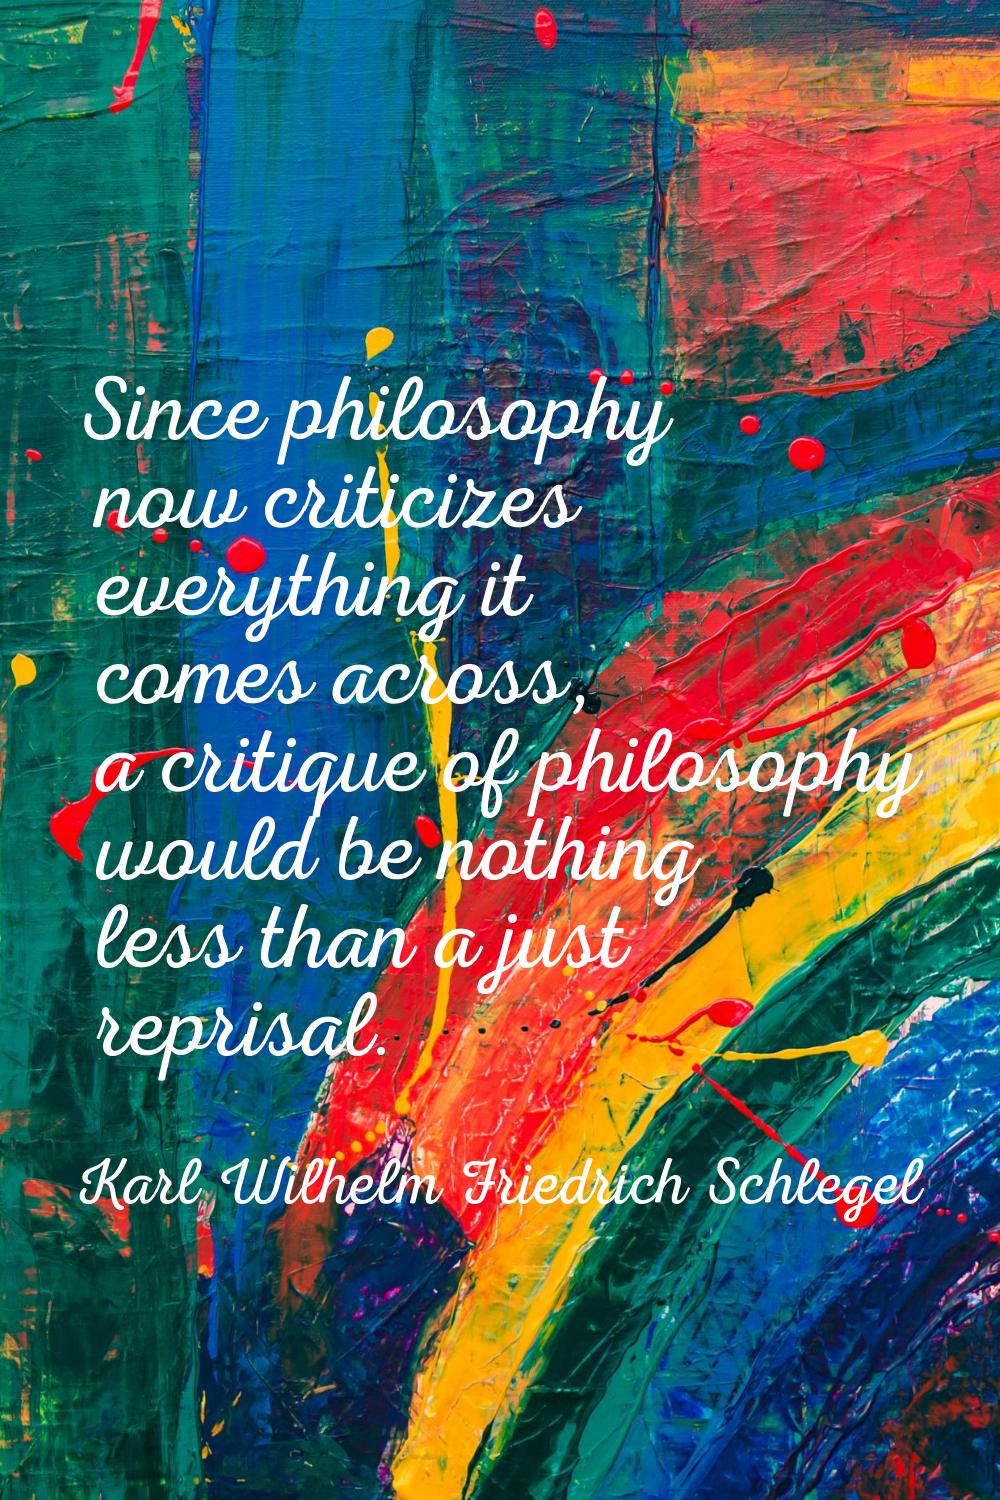 Since philosophy now criticizes everything it comes across, a critique of philosophy would be nothi